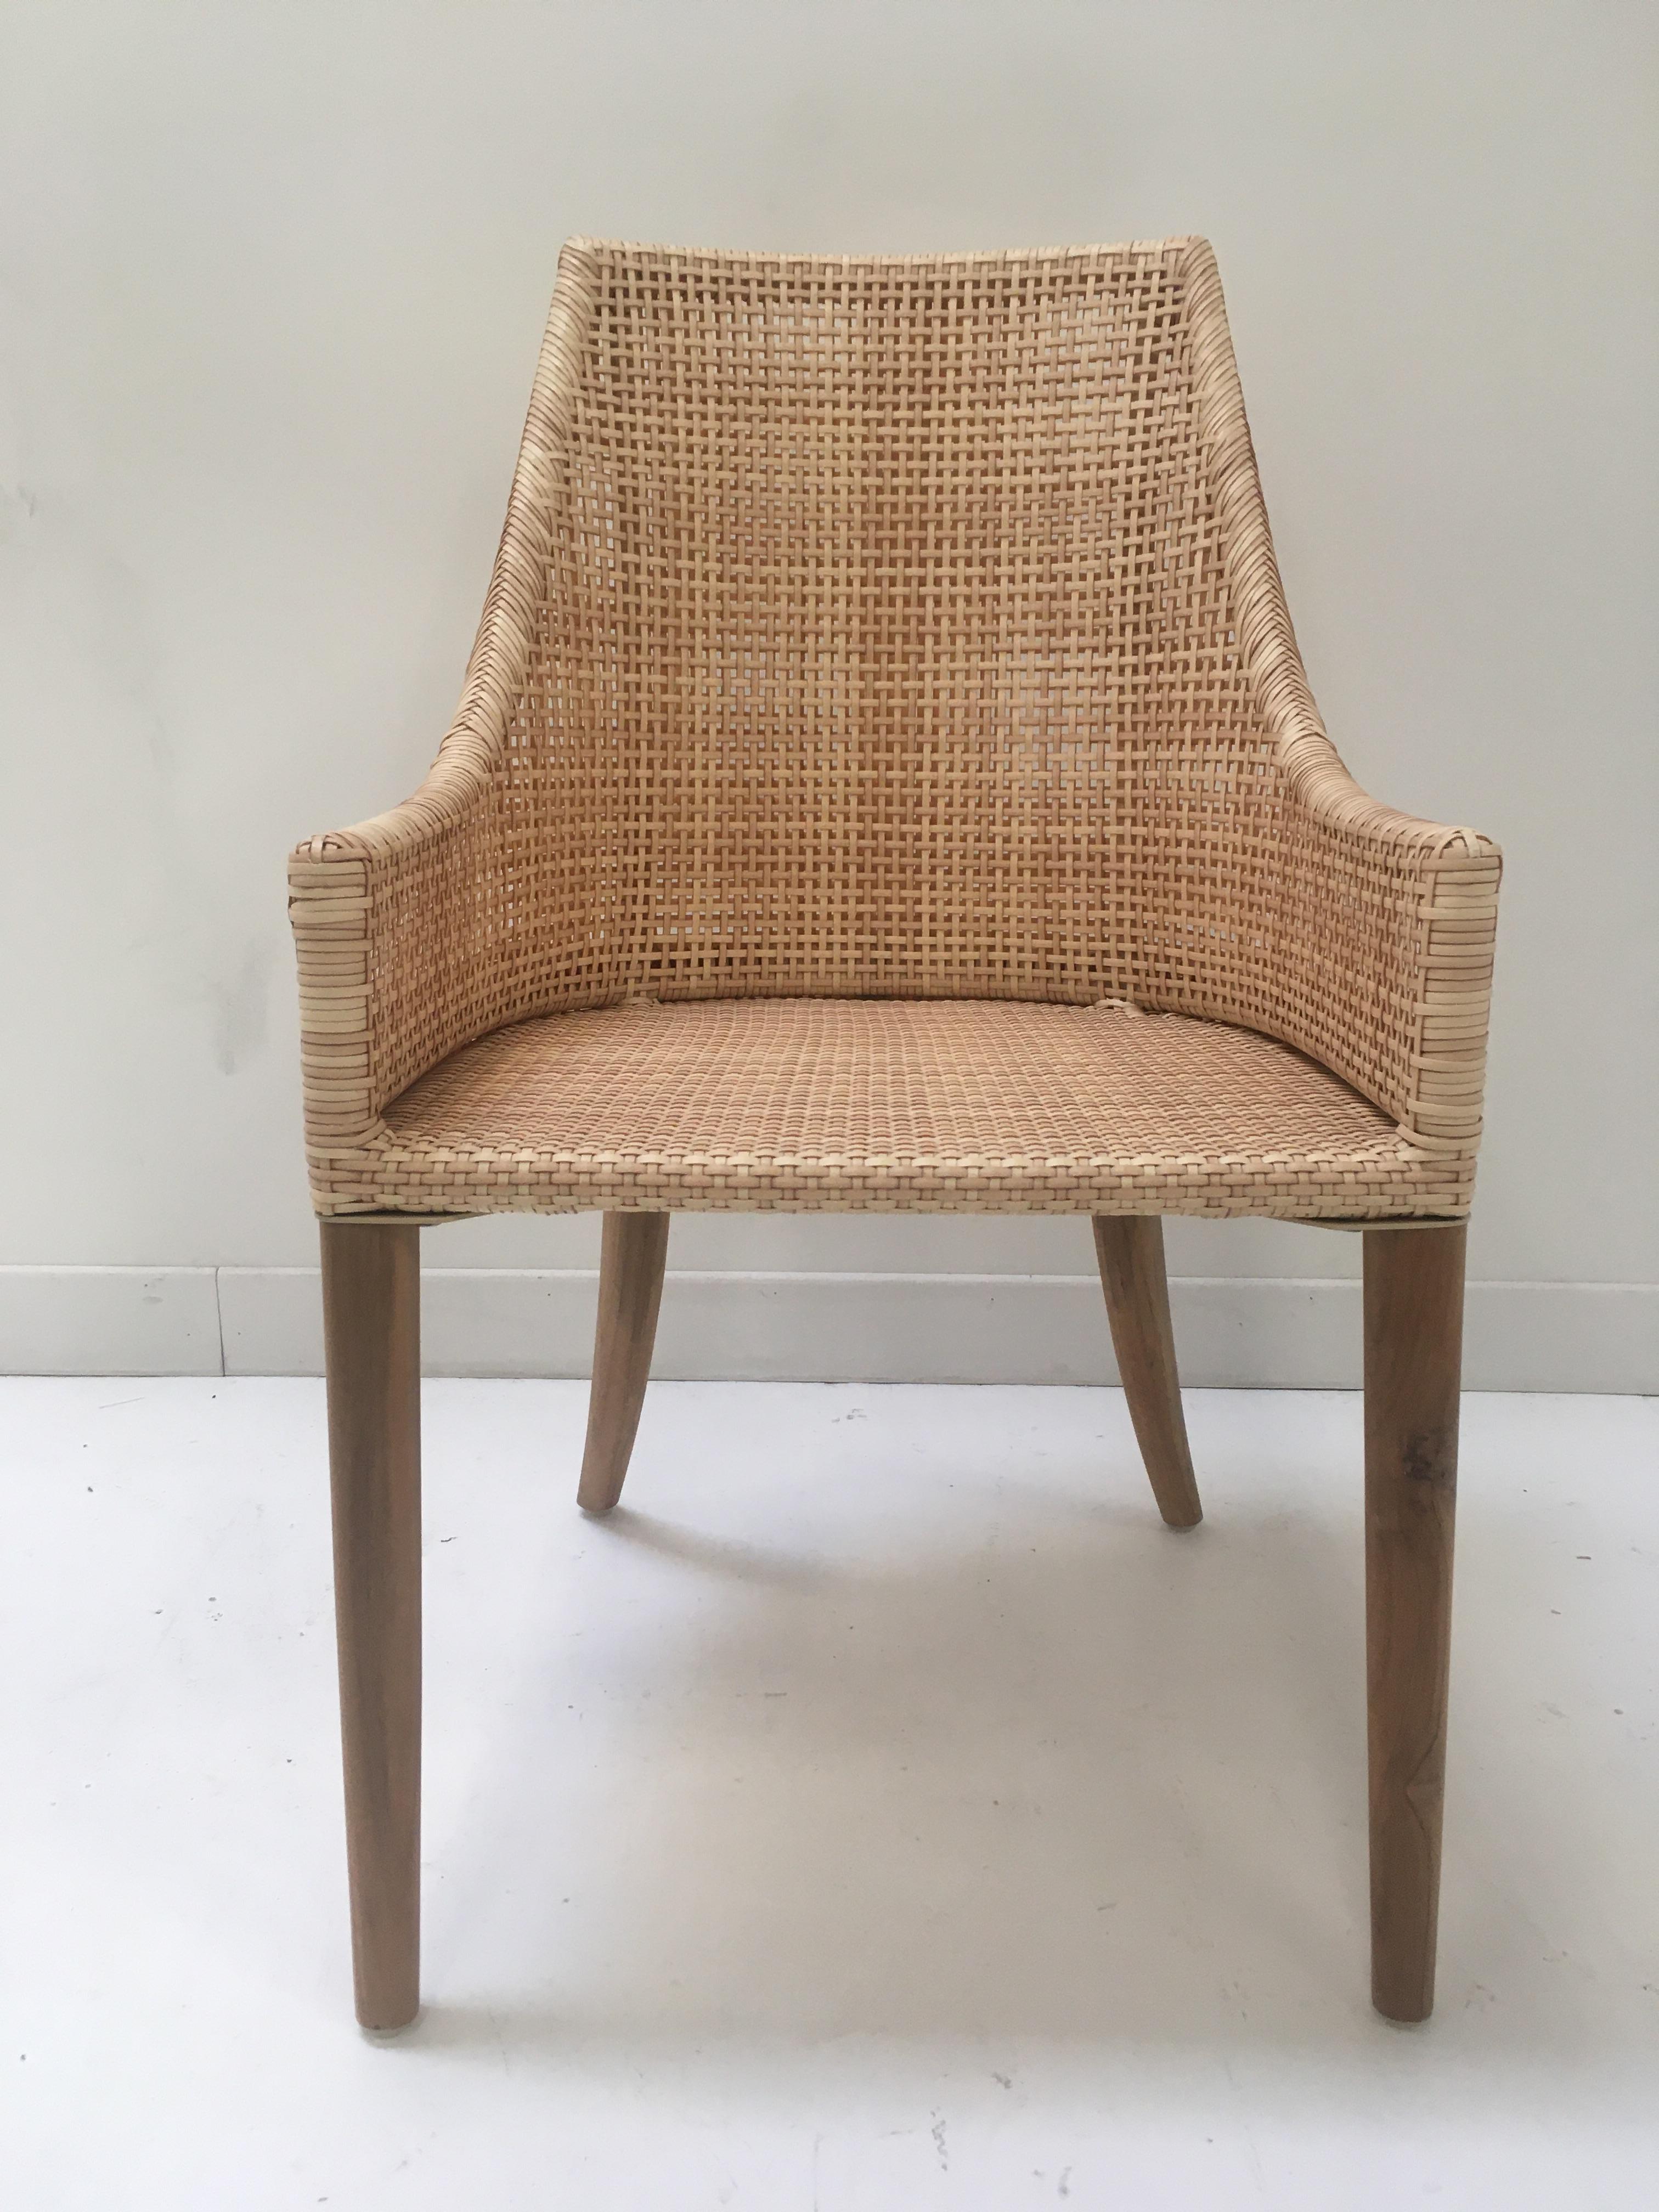 Handcrafted Braided Resin Rattan Effect and Teak Wooden Outdoor Chair For Sale 1